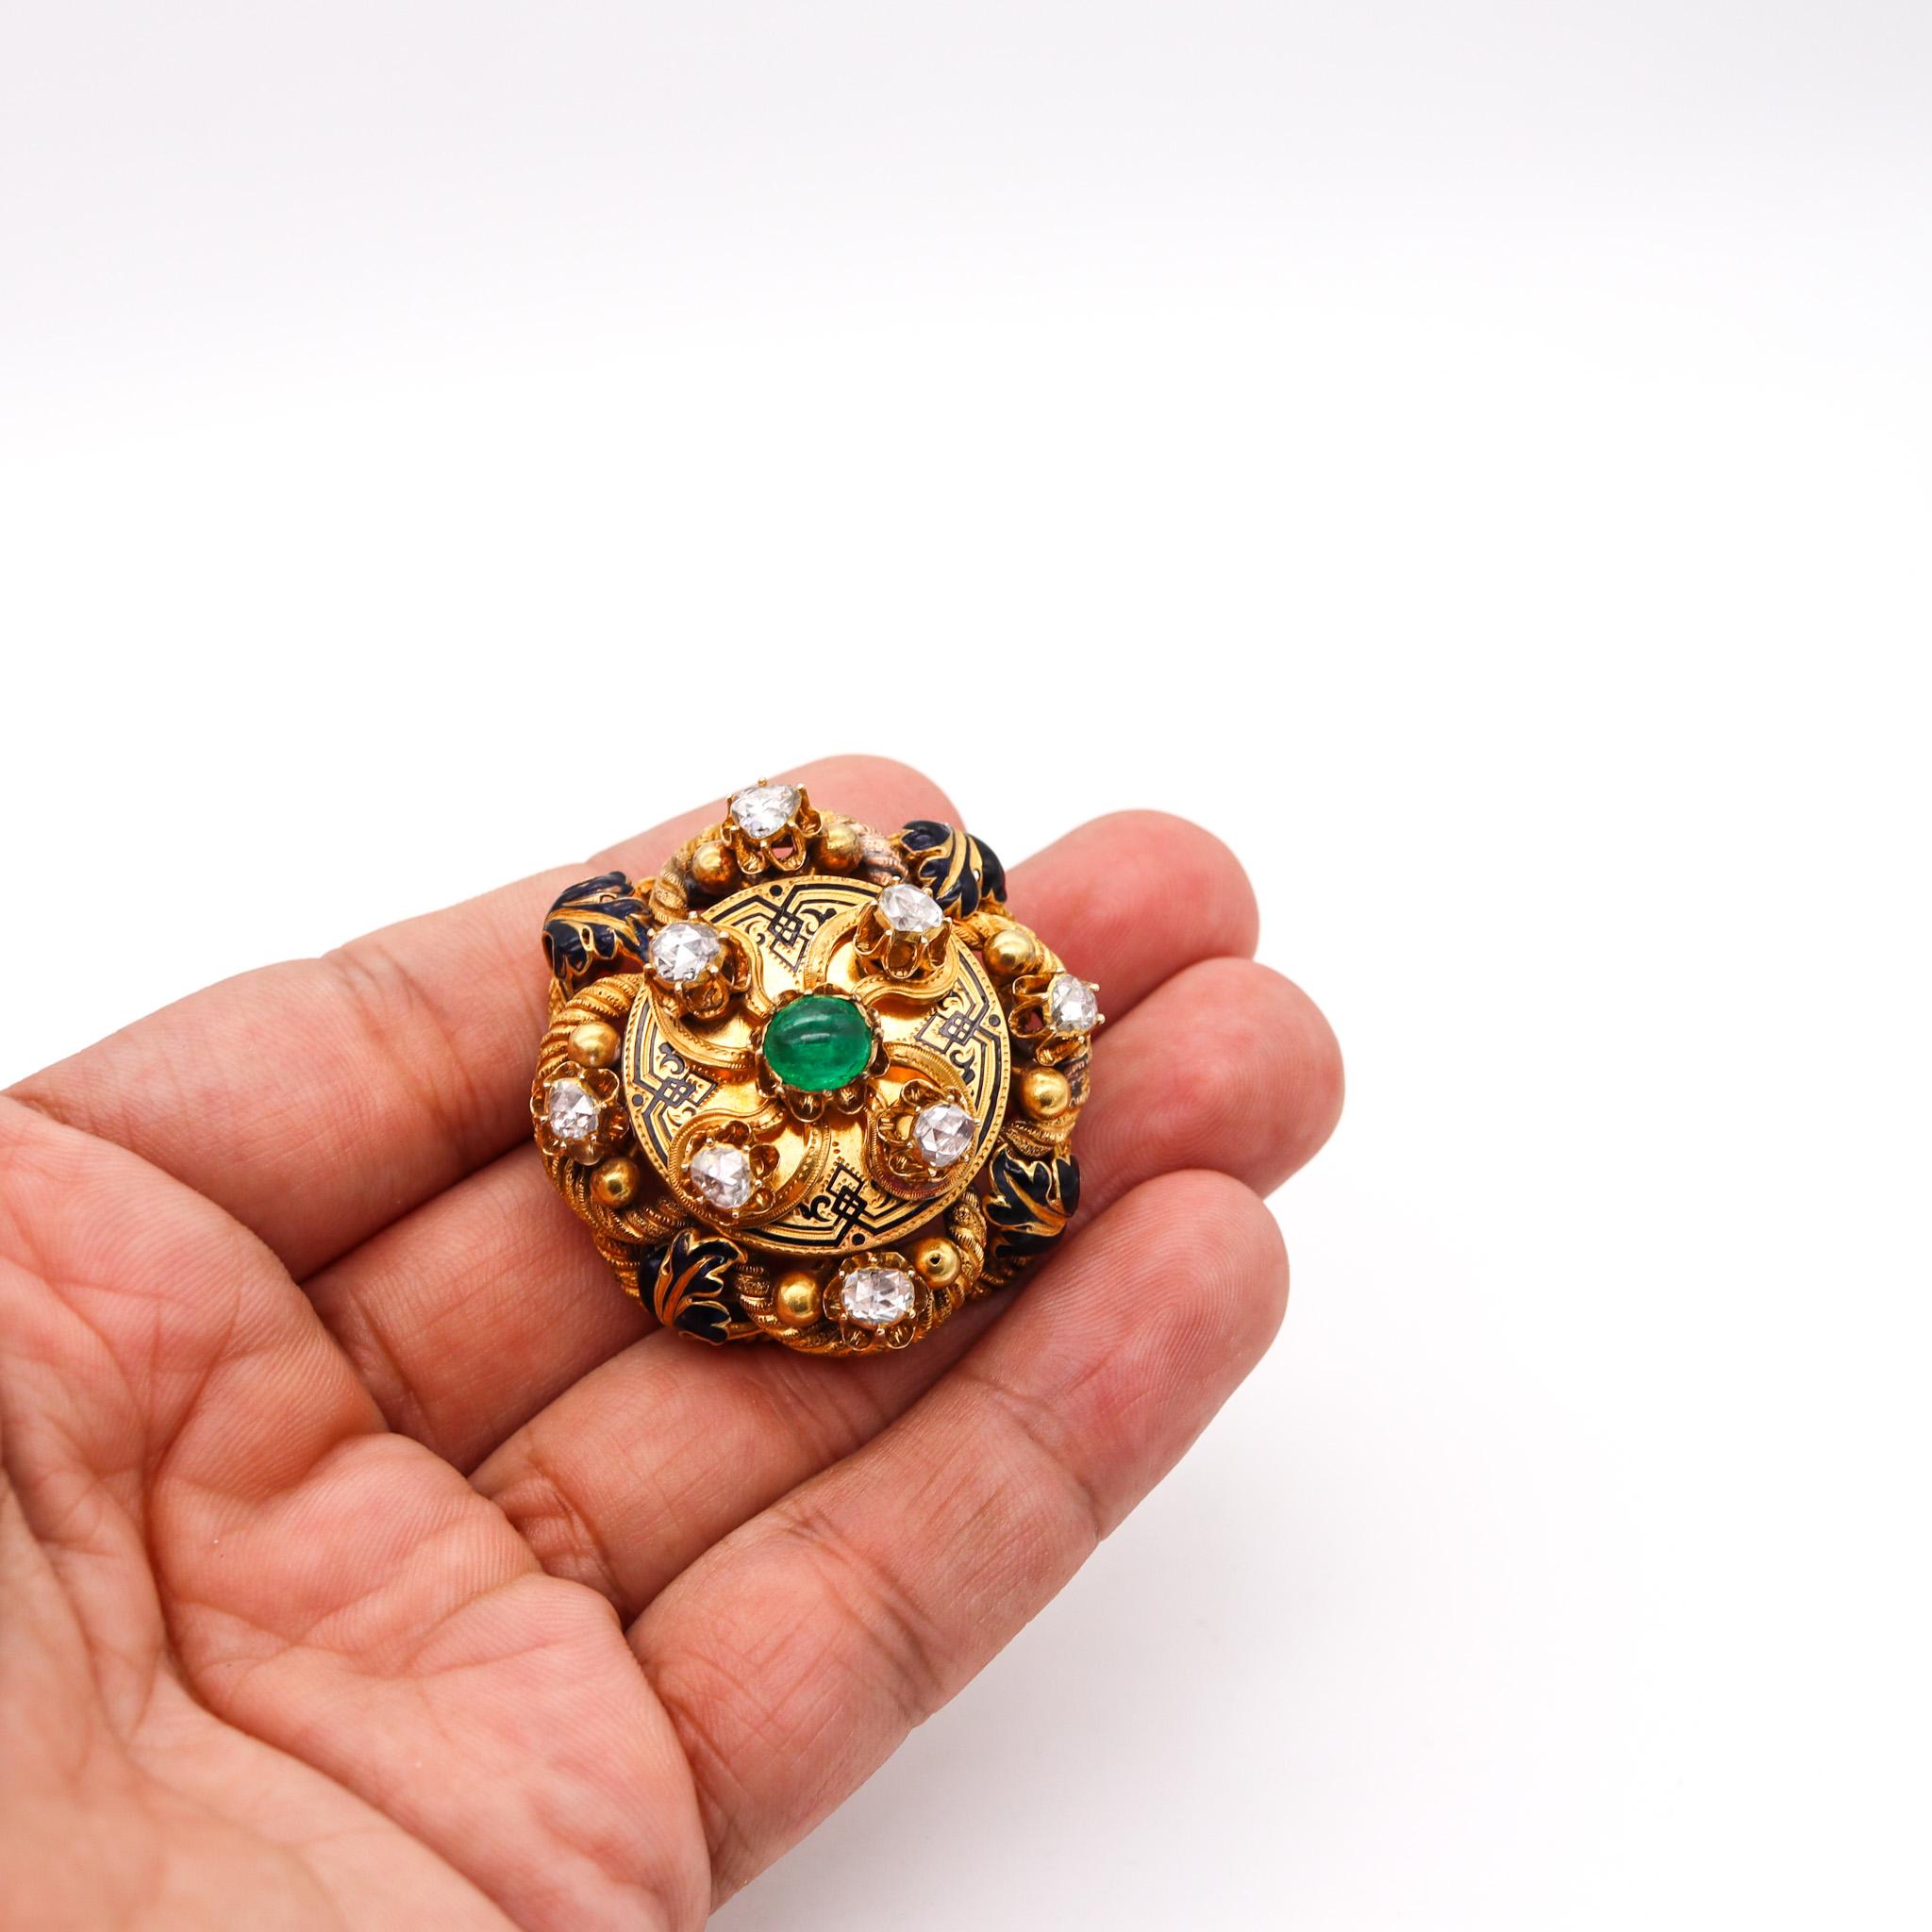 Cabochon Georgian 1820 Antique Convertible Brooch 18kt Gold 5.54 Ctw in Diamonds Emerald For Sale